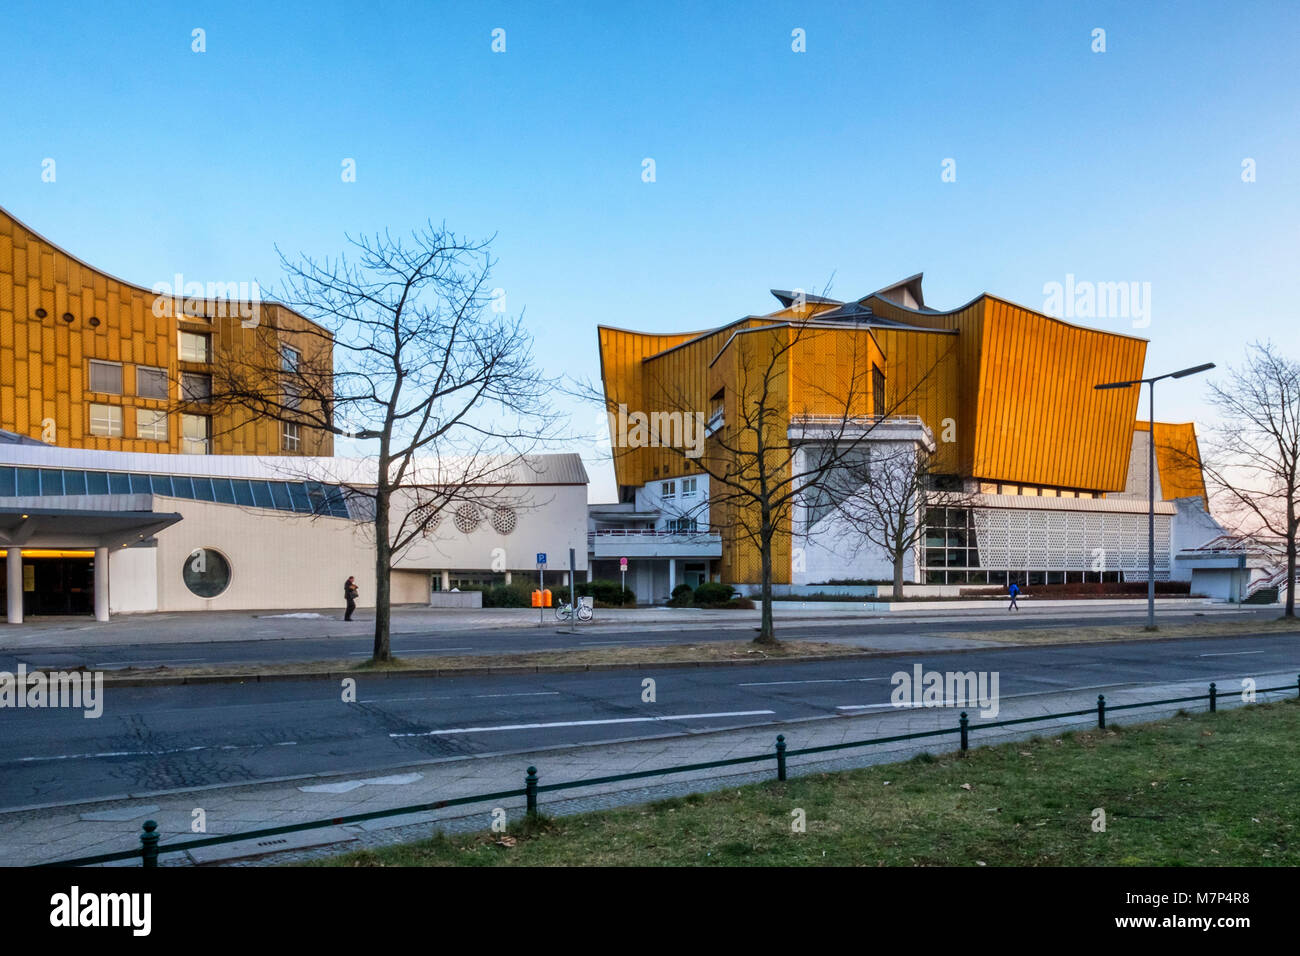 Berliner Philharmonie,Berlin Philharmonic Concert Hall designed by Hans Scharoun. Classical concert venue with stylish modern architecture Stock Photo